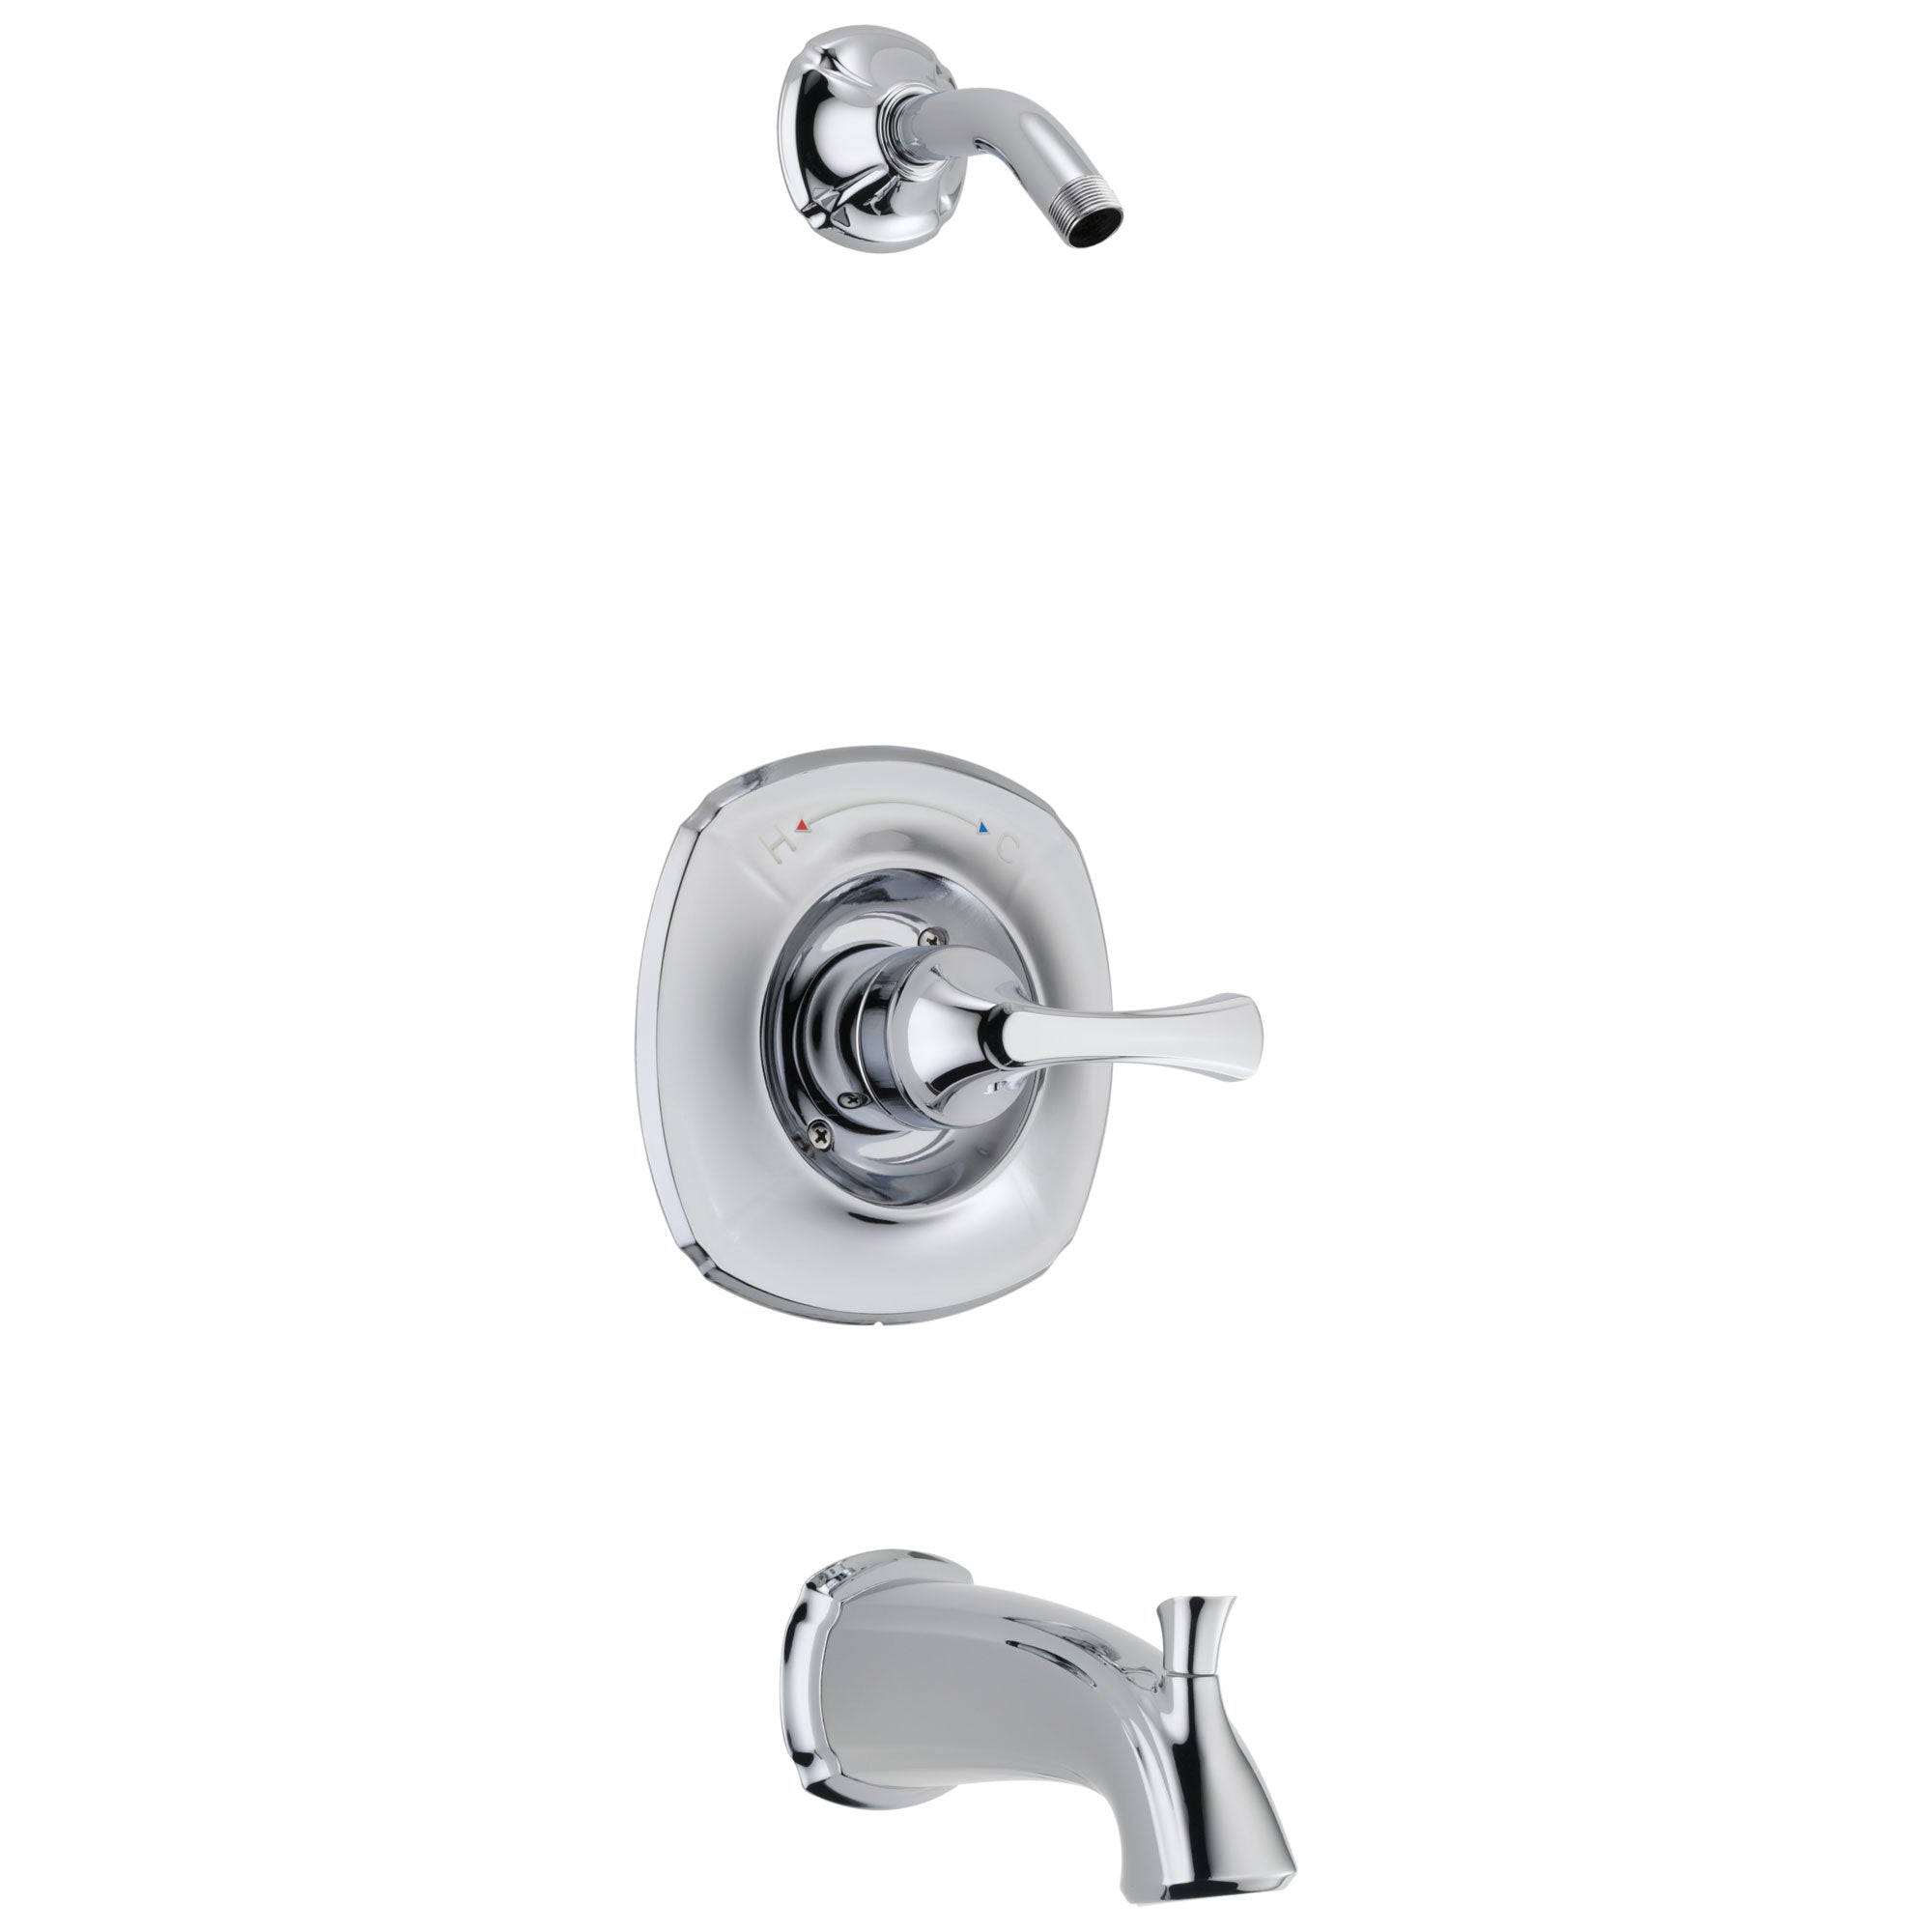 Delta Addison Collection Chrome Finish Monitor 14 Series Bath Tub and Shower Faucet Trim Kit - Less Showerhead (Requires Rough-in Valve) DT14492LHD